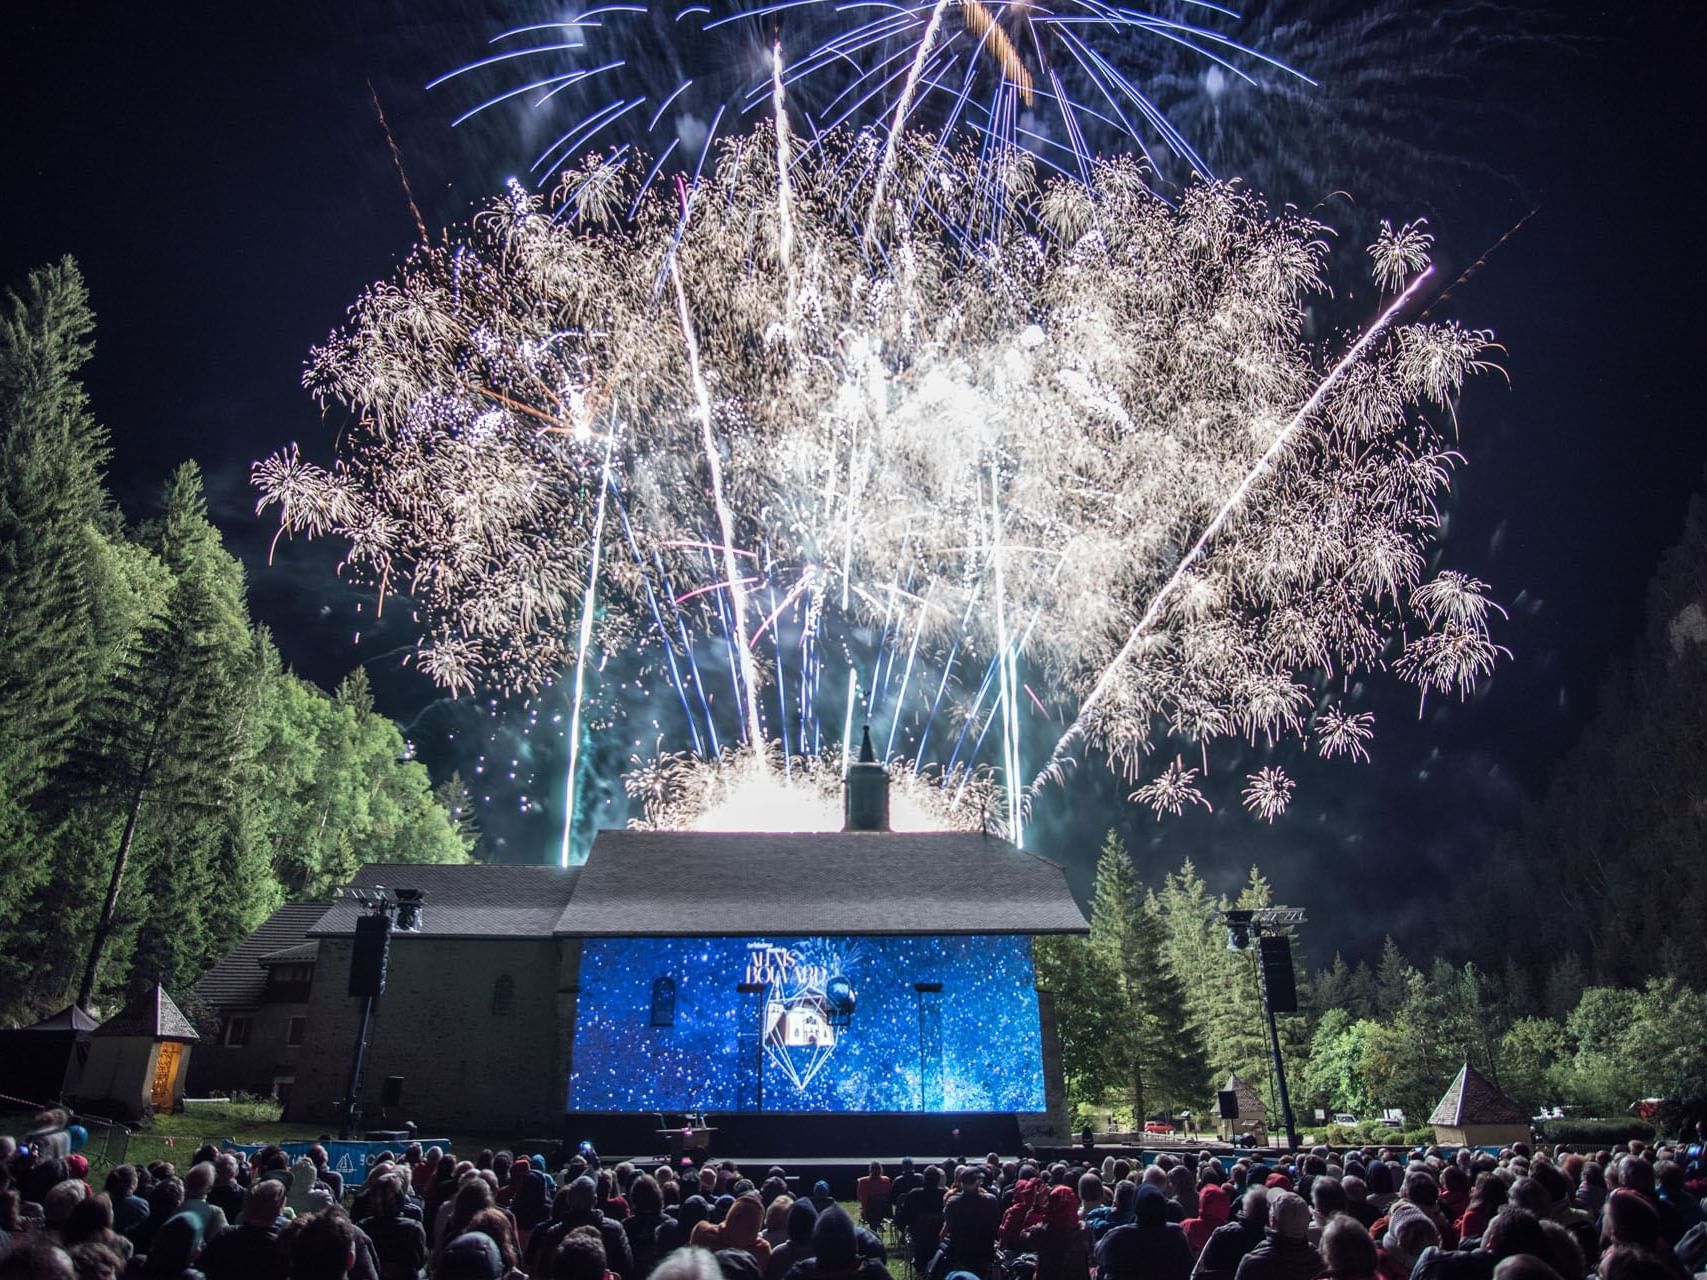 Fireworks in the sky at a musical show near Originals Hotels